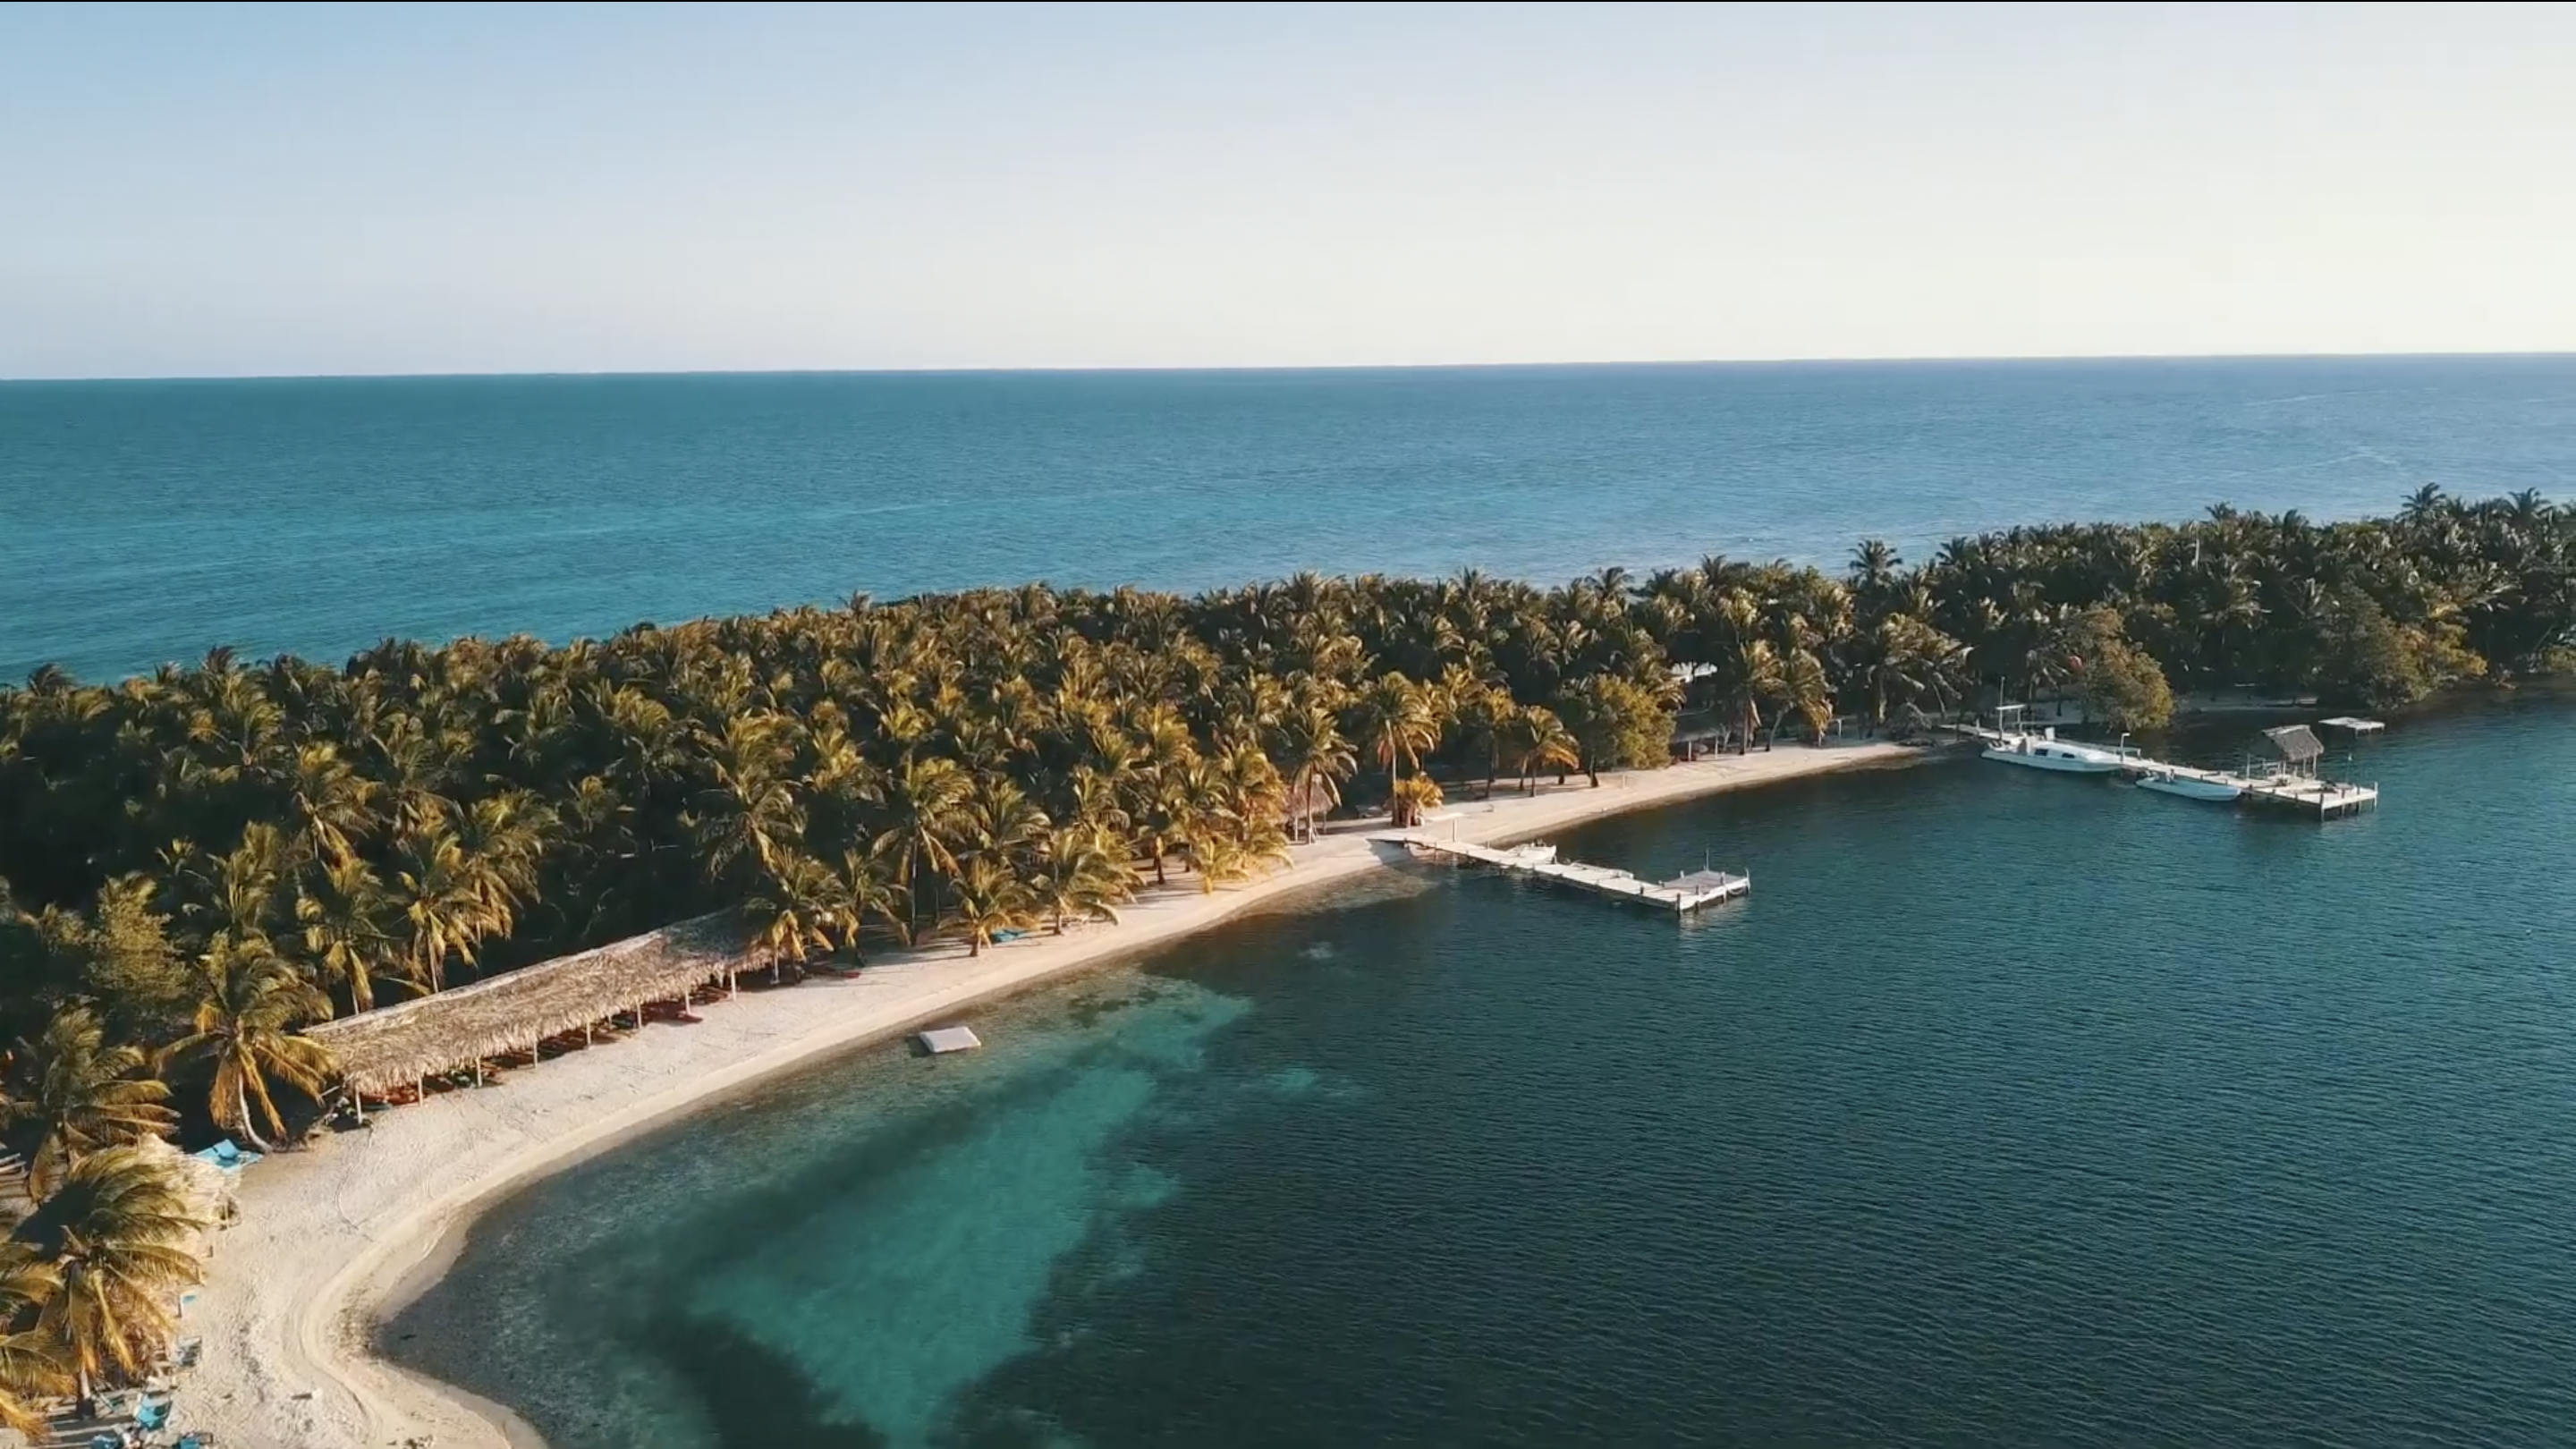 1.5-Acre Resort with Dive Center for Sale on Private Island